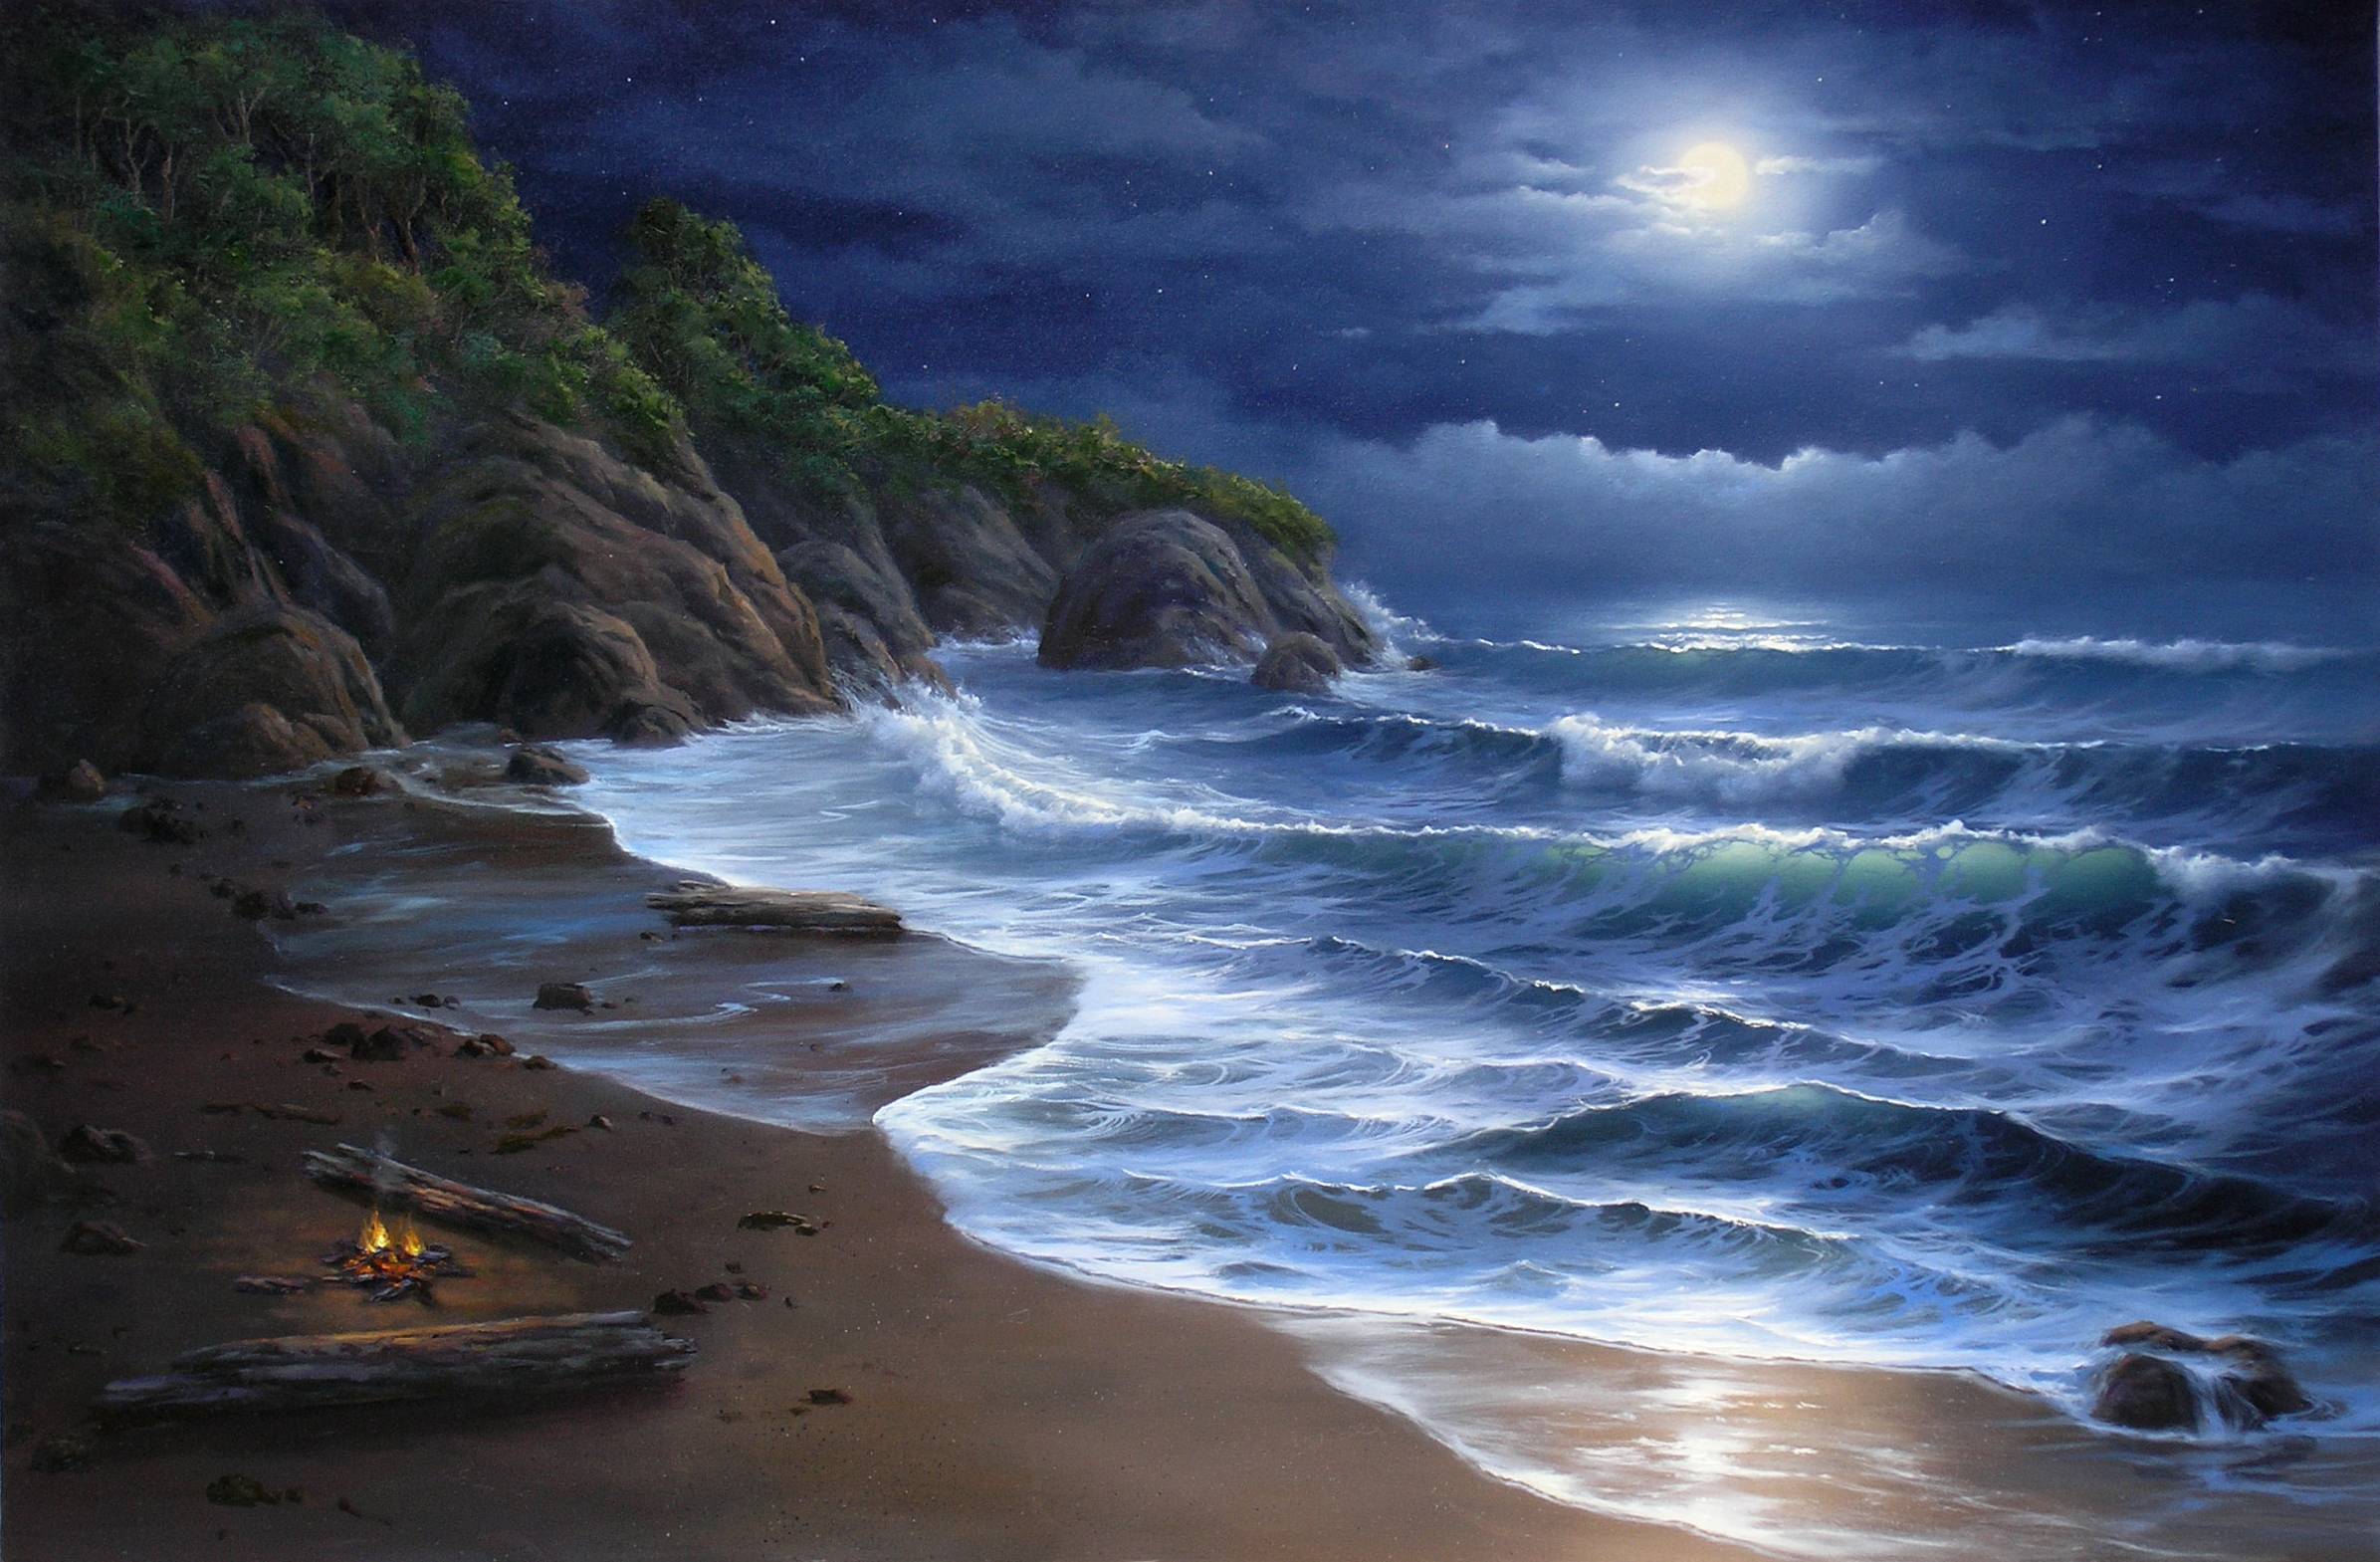 image For > Beach Night Waves